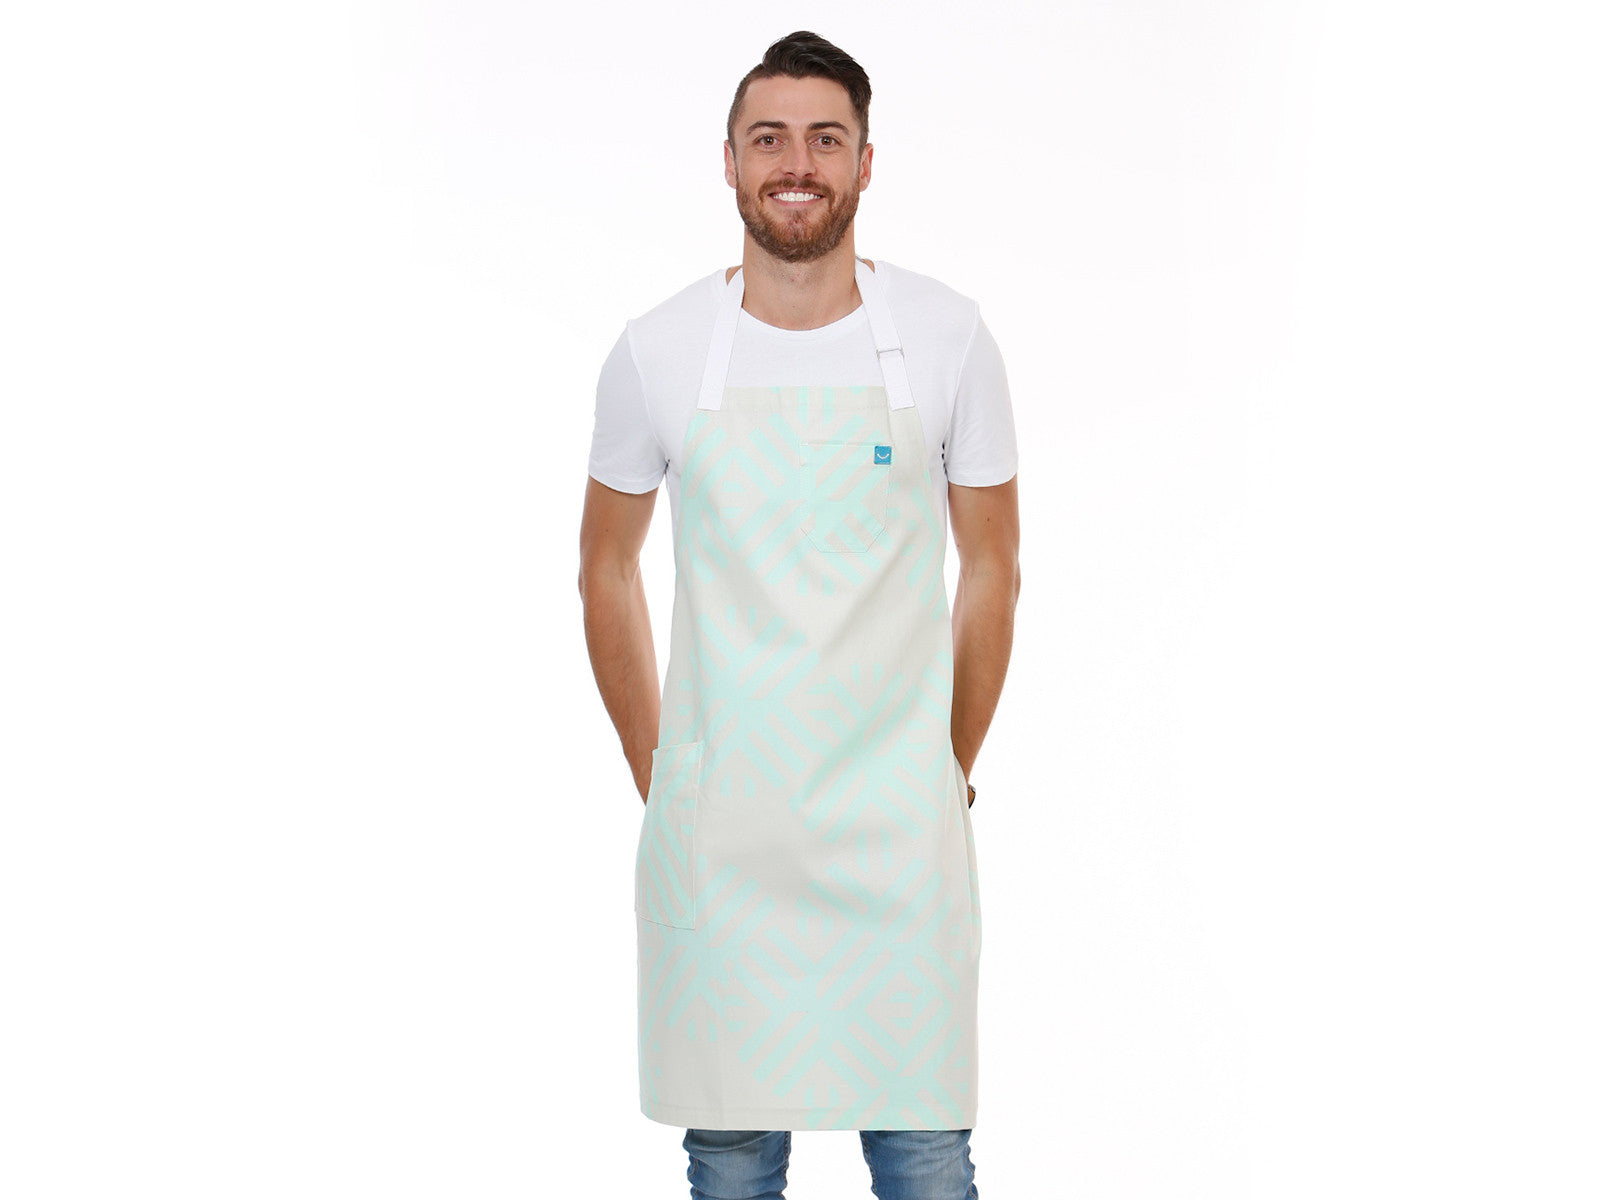 Peppermint Apron - Nice Aprons